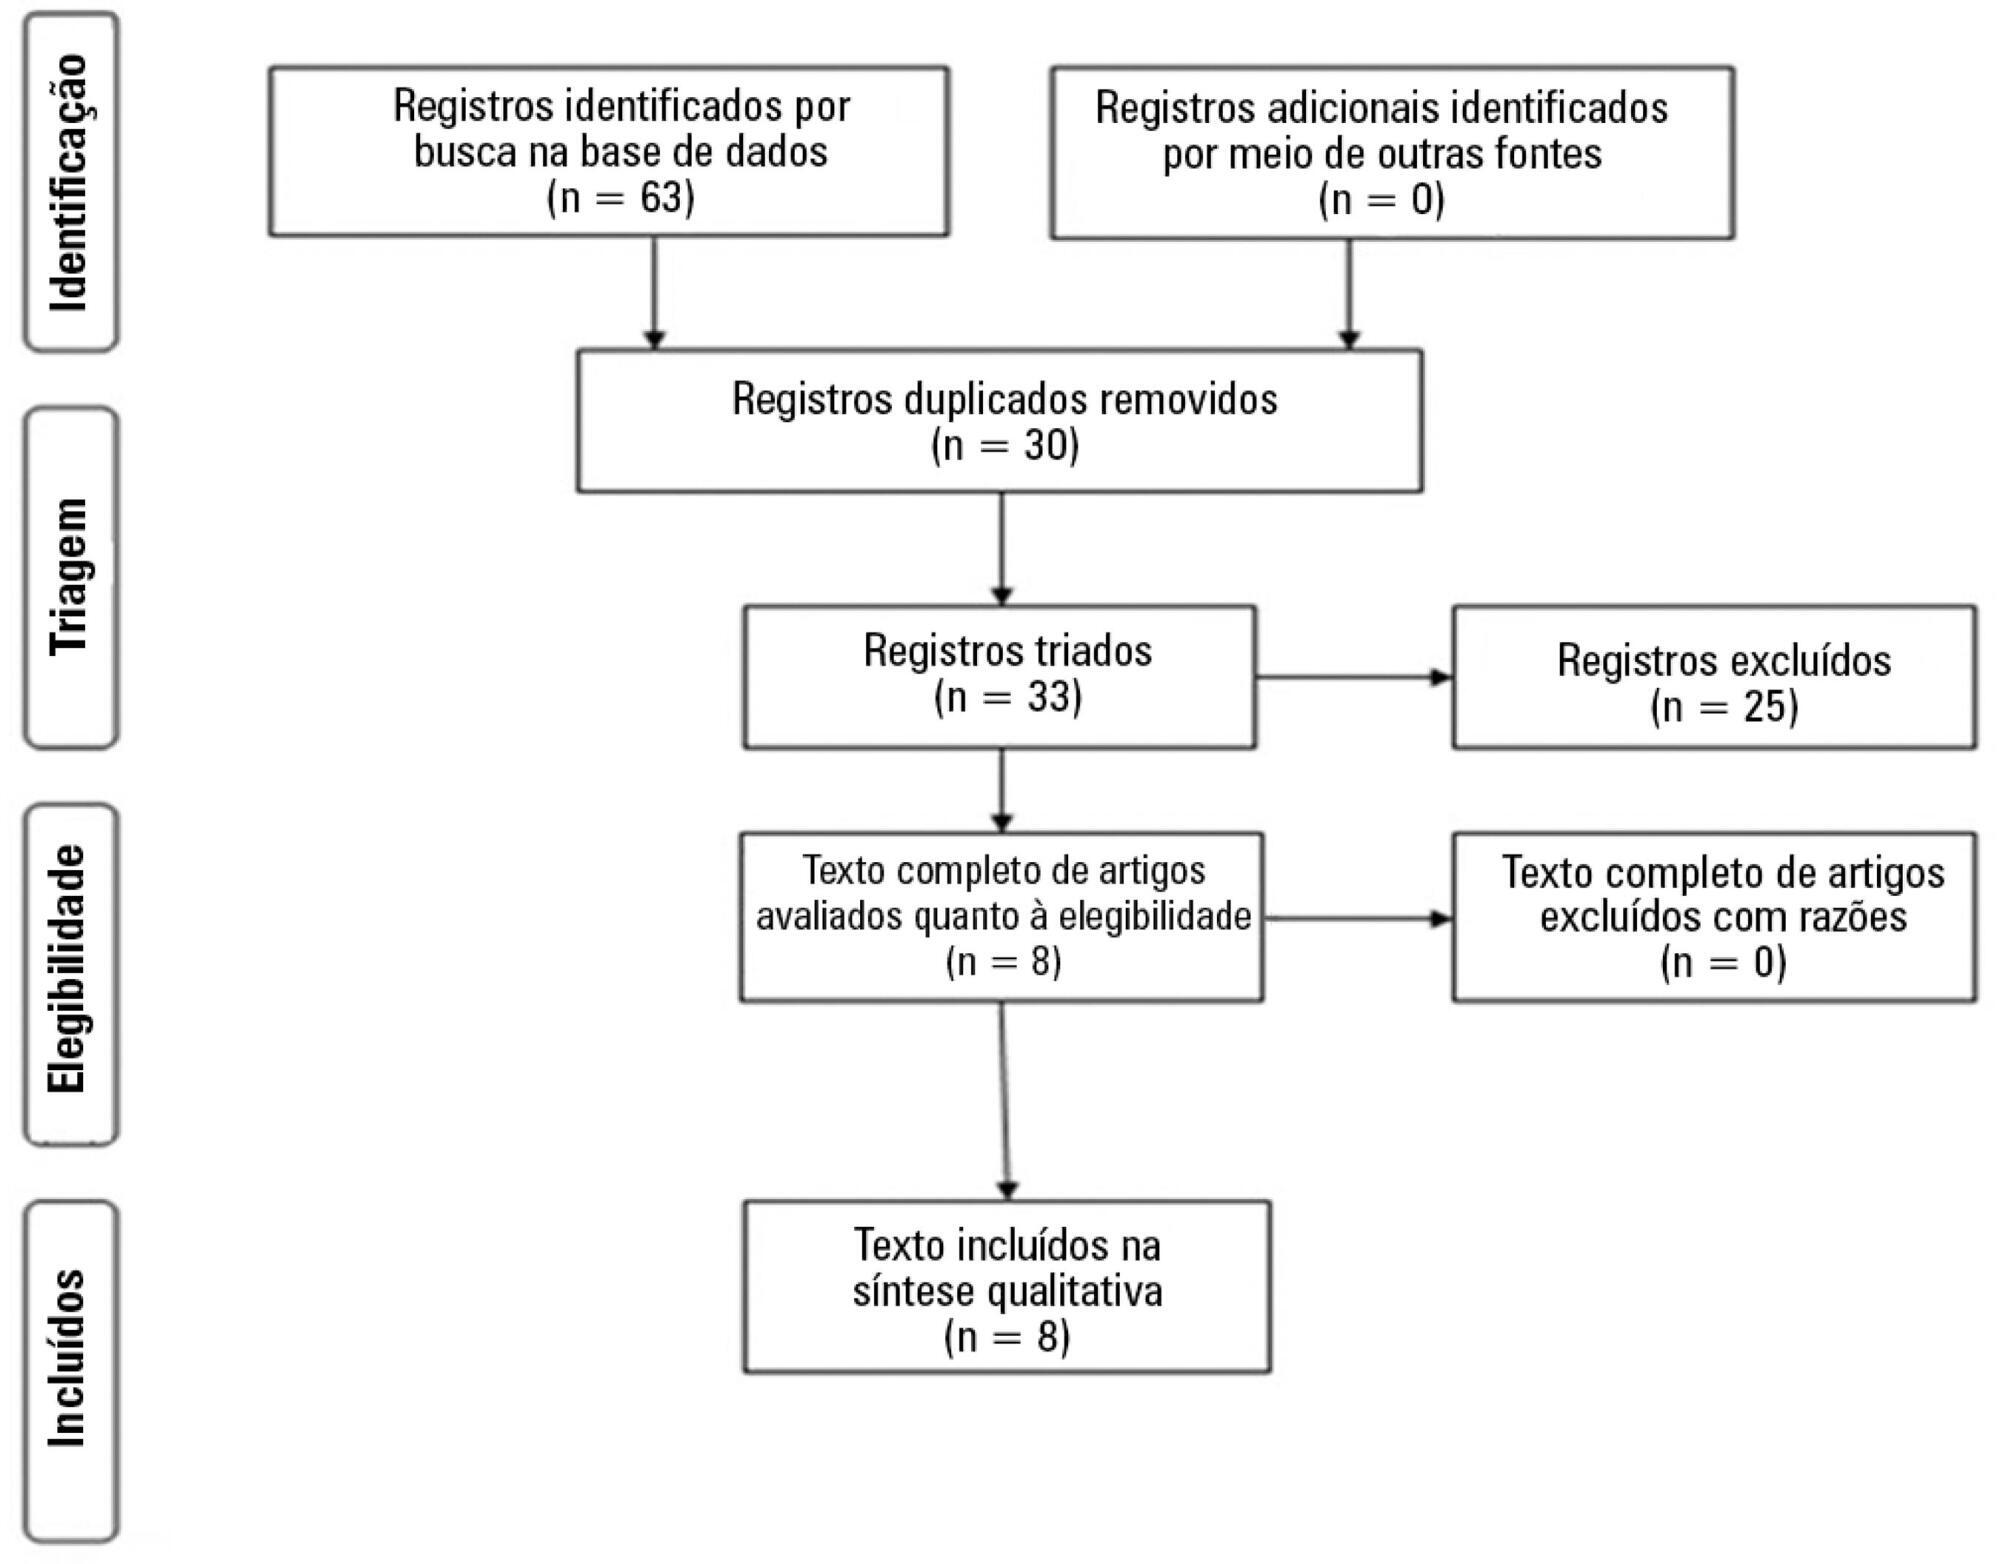 Use of dietary fibers in enteral nutrition of critically ill patients: a systematic review